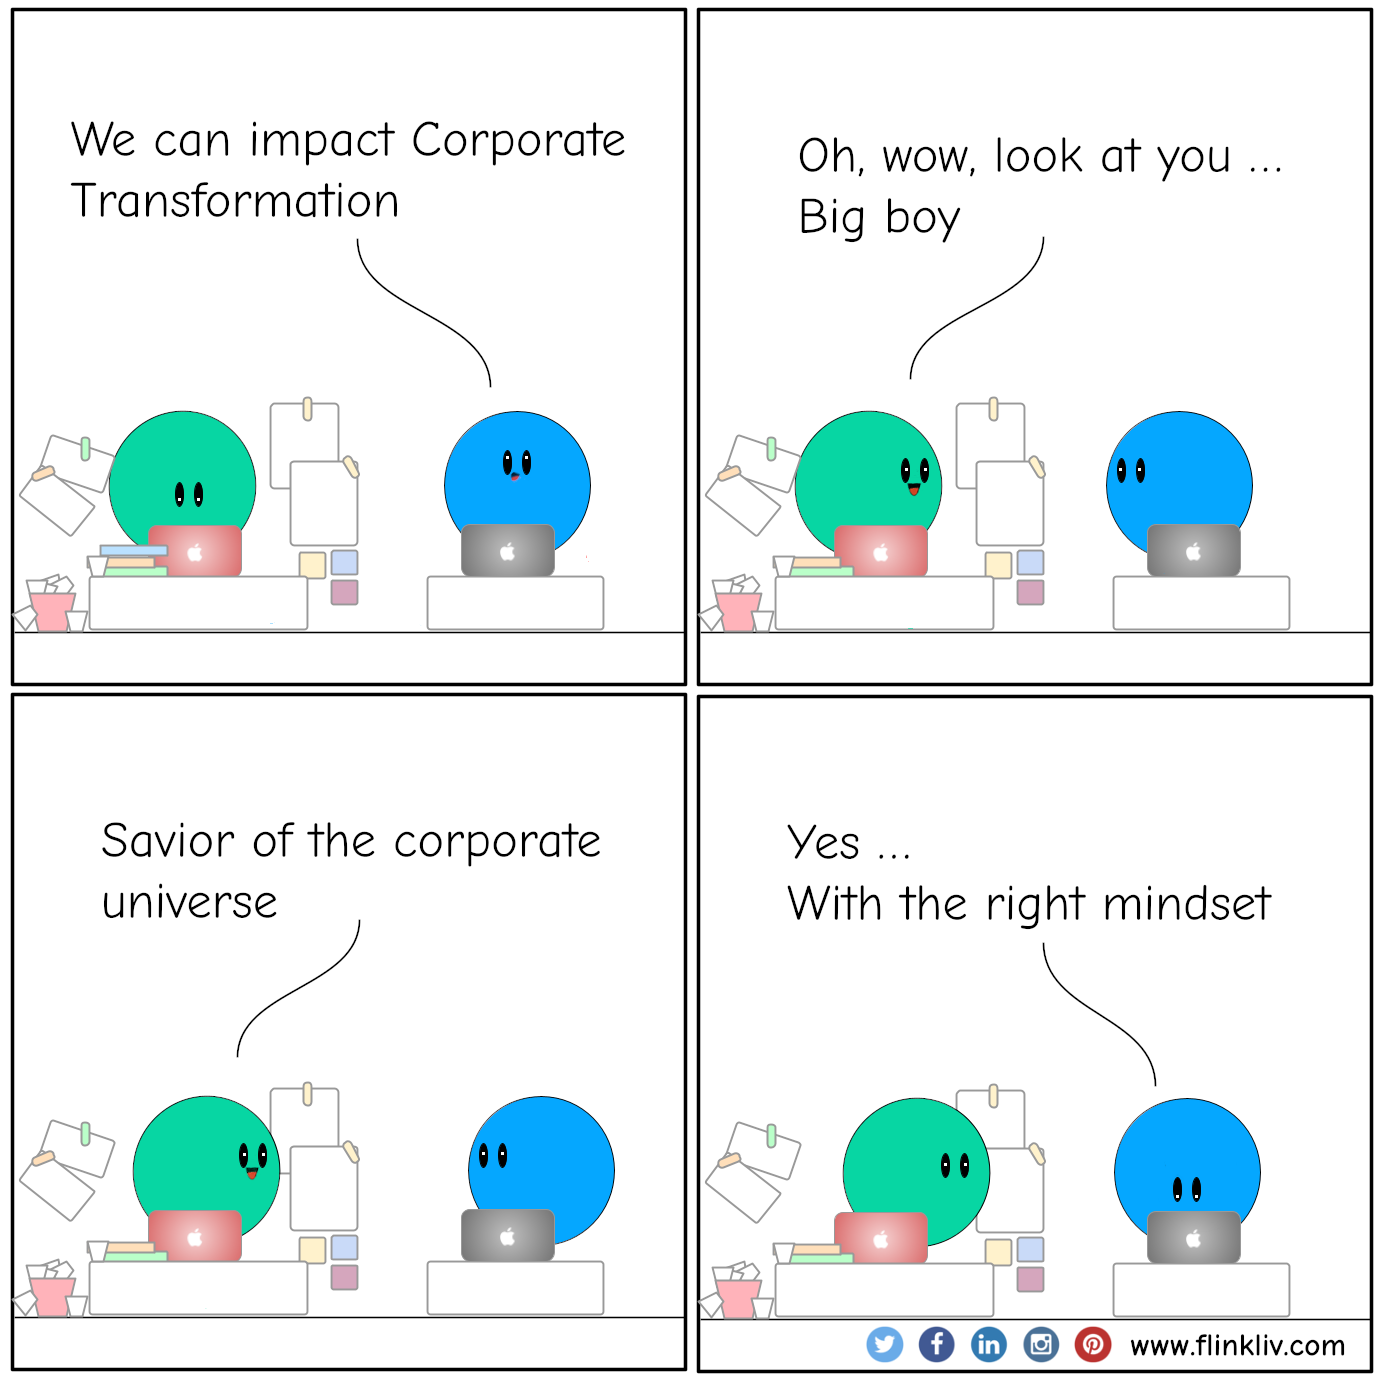 Conversation between A and B about how people can impact corporate transformations. B: We can impact Corporate Transformation. A: Oh, wow, look at you, big boy, A: Savior of the corporate universe B: Yes, with the right mindset. By flinkliv.com